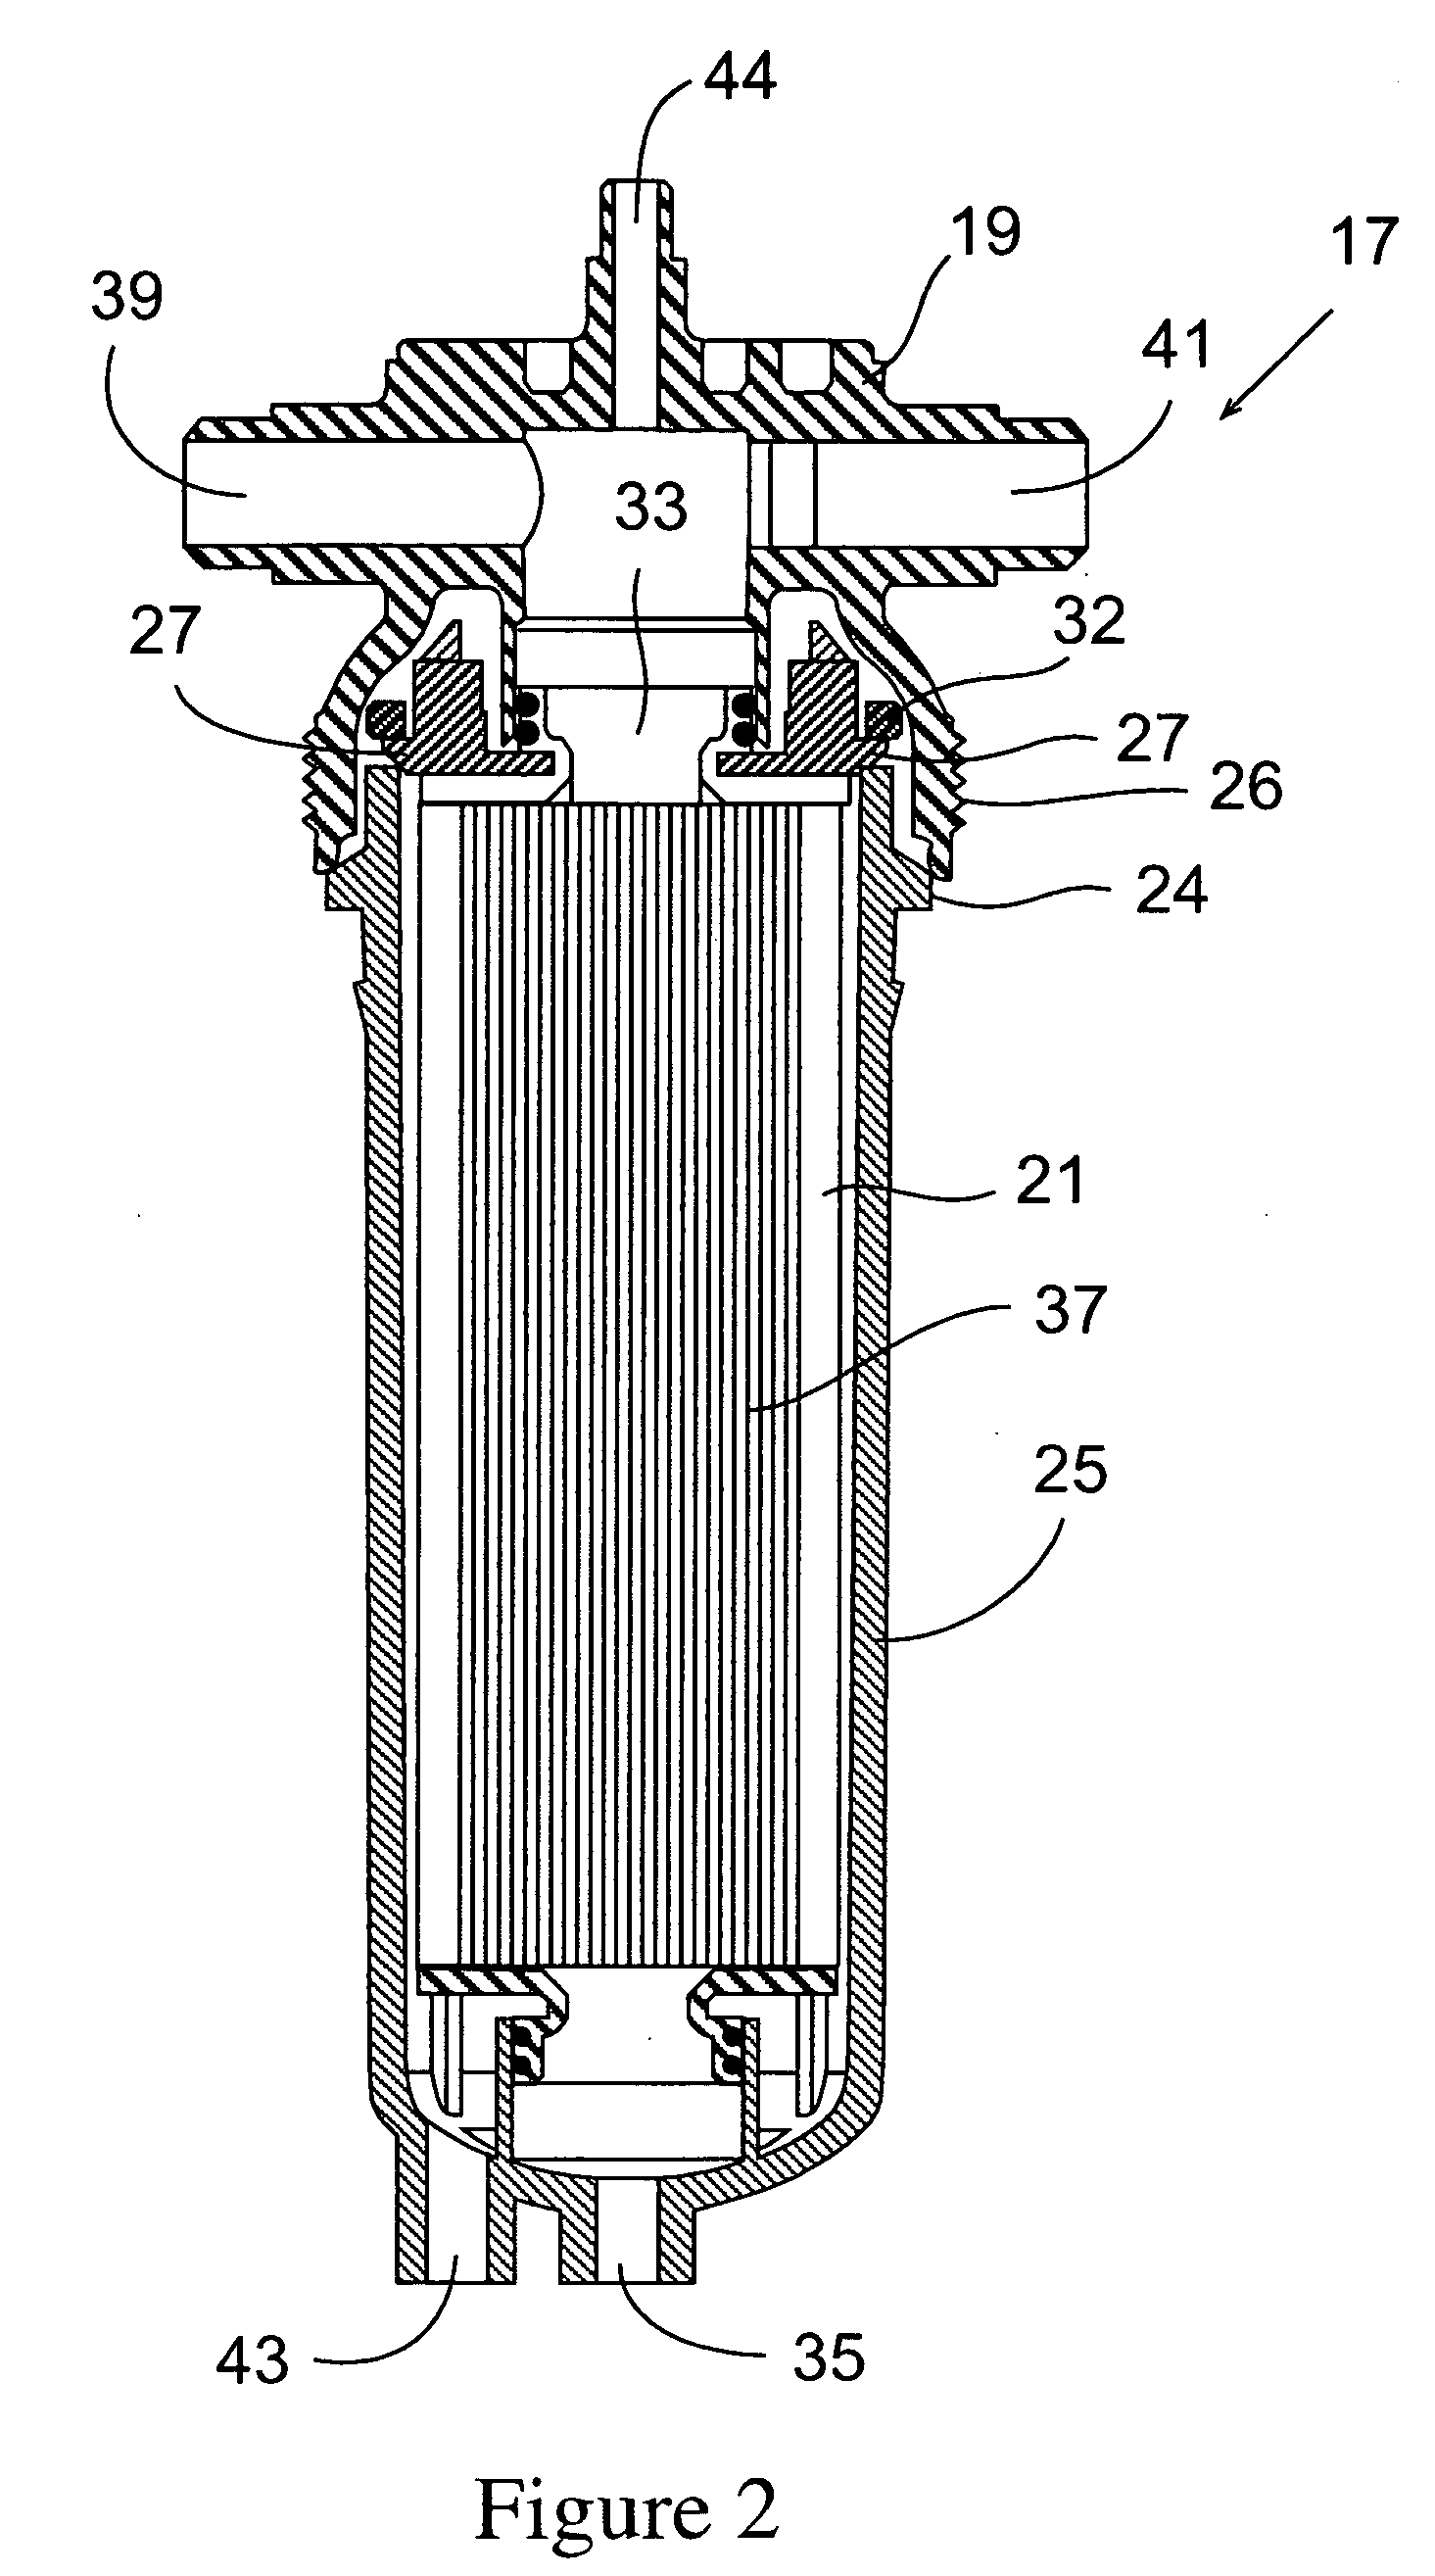 Mass or energy transfer cartridge and module